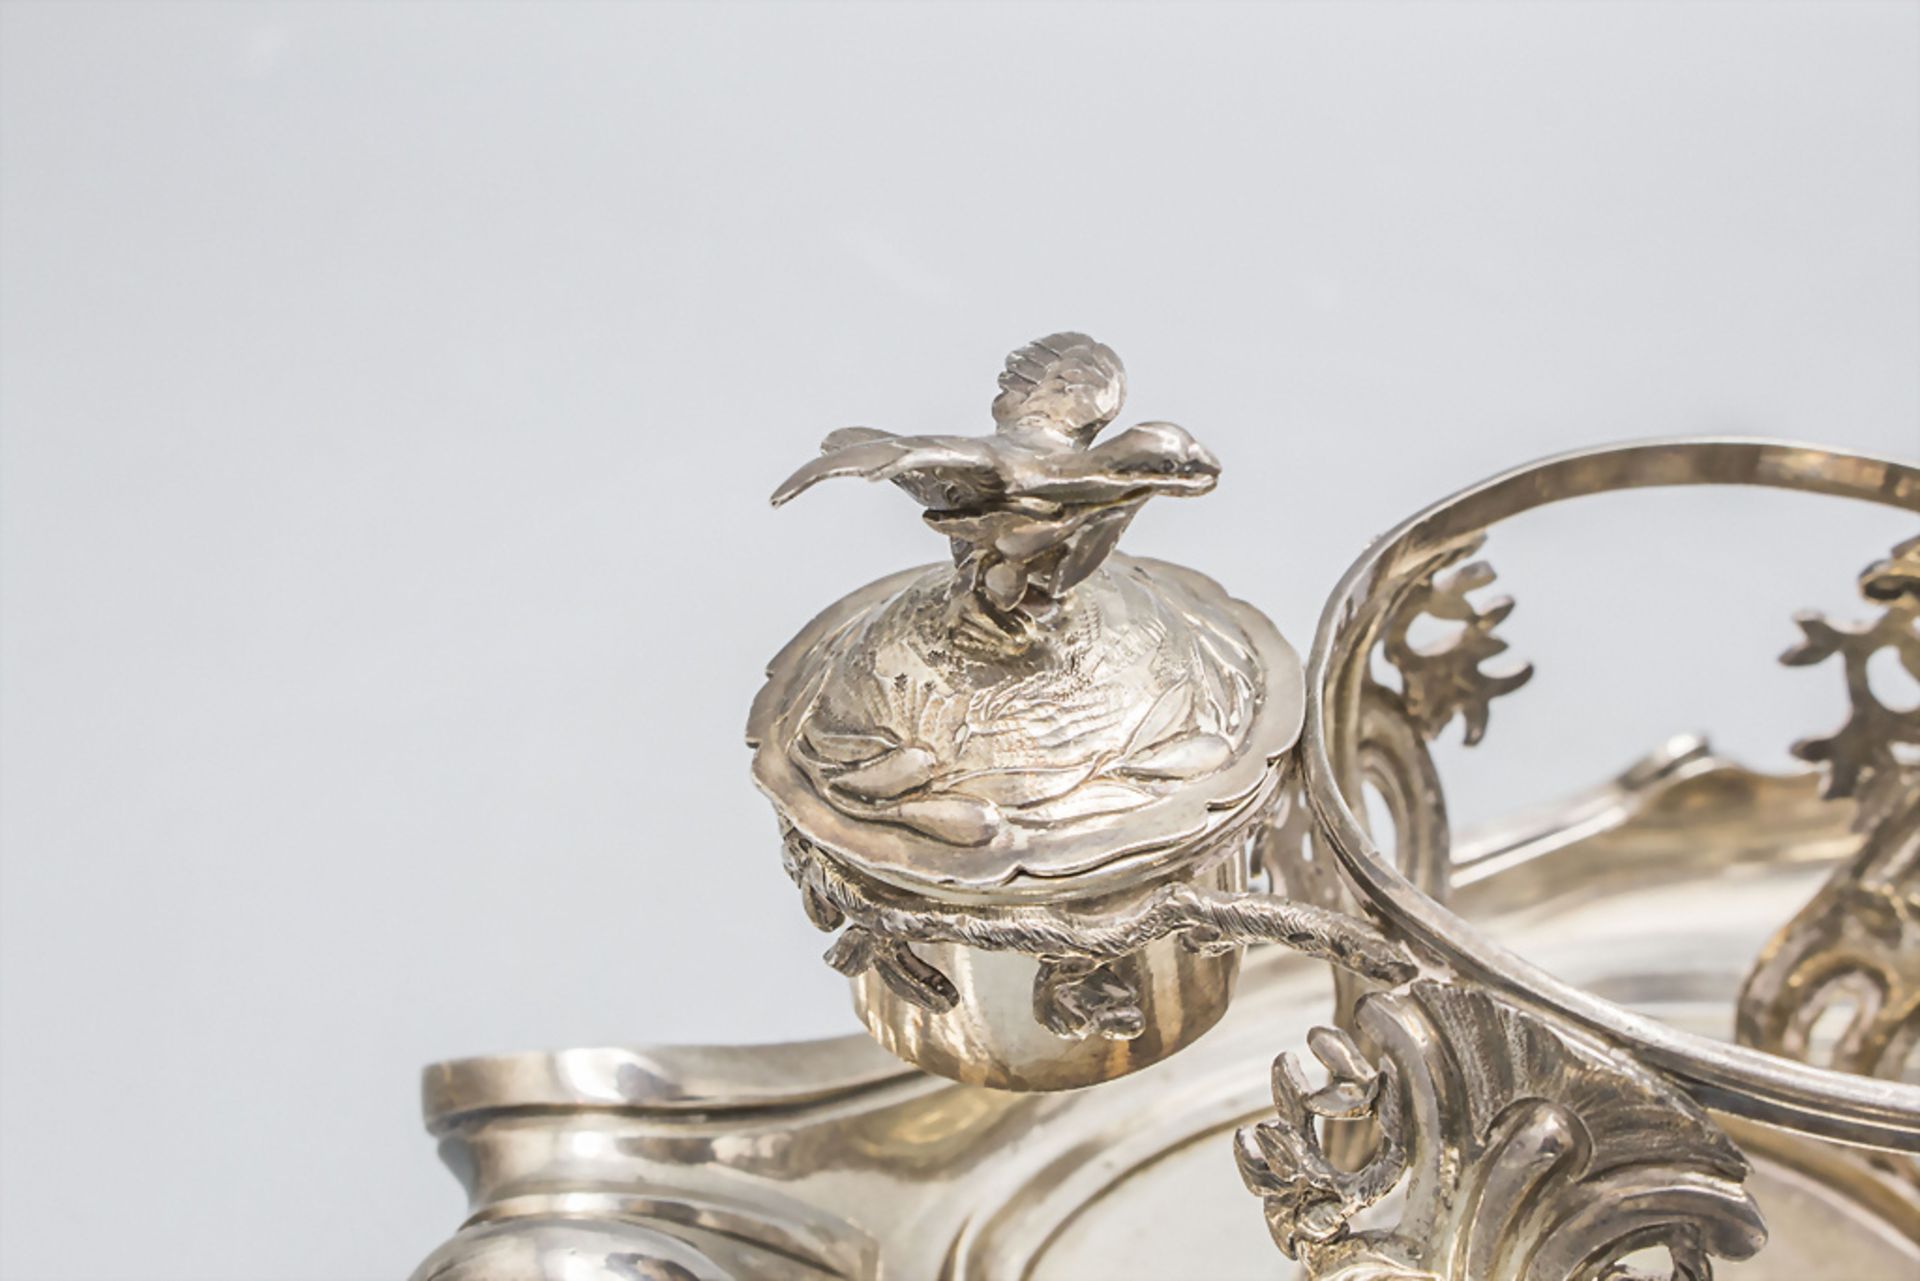 Barock-Menage / A Baroque silver cruet stand / Huiliere, Guillaume Brunet, Arles, 1770 - Image 5 of 9